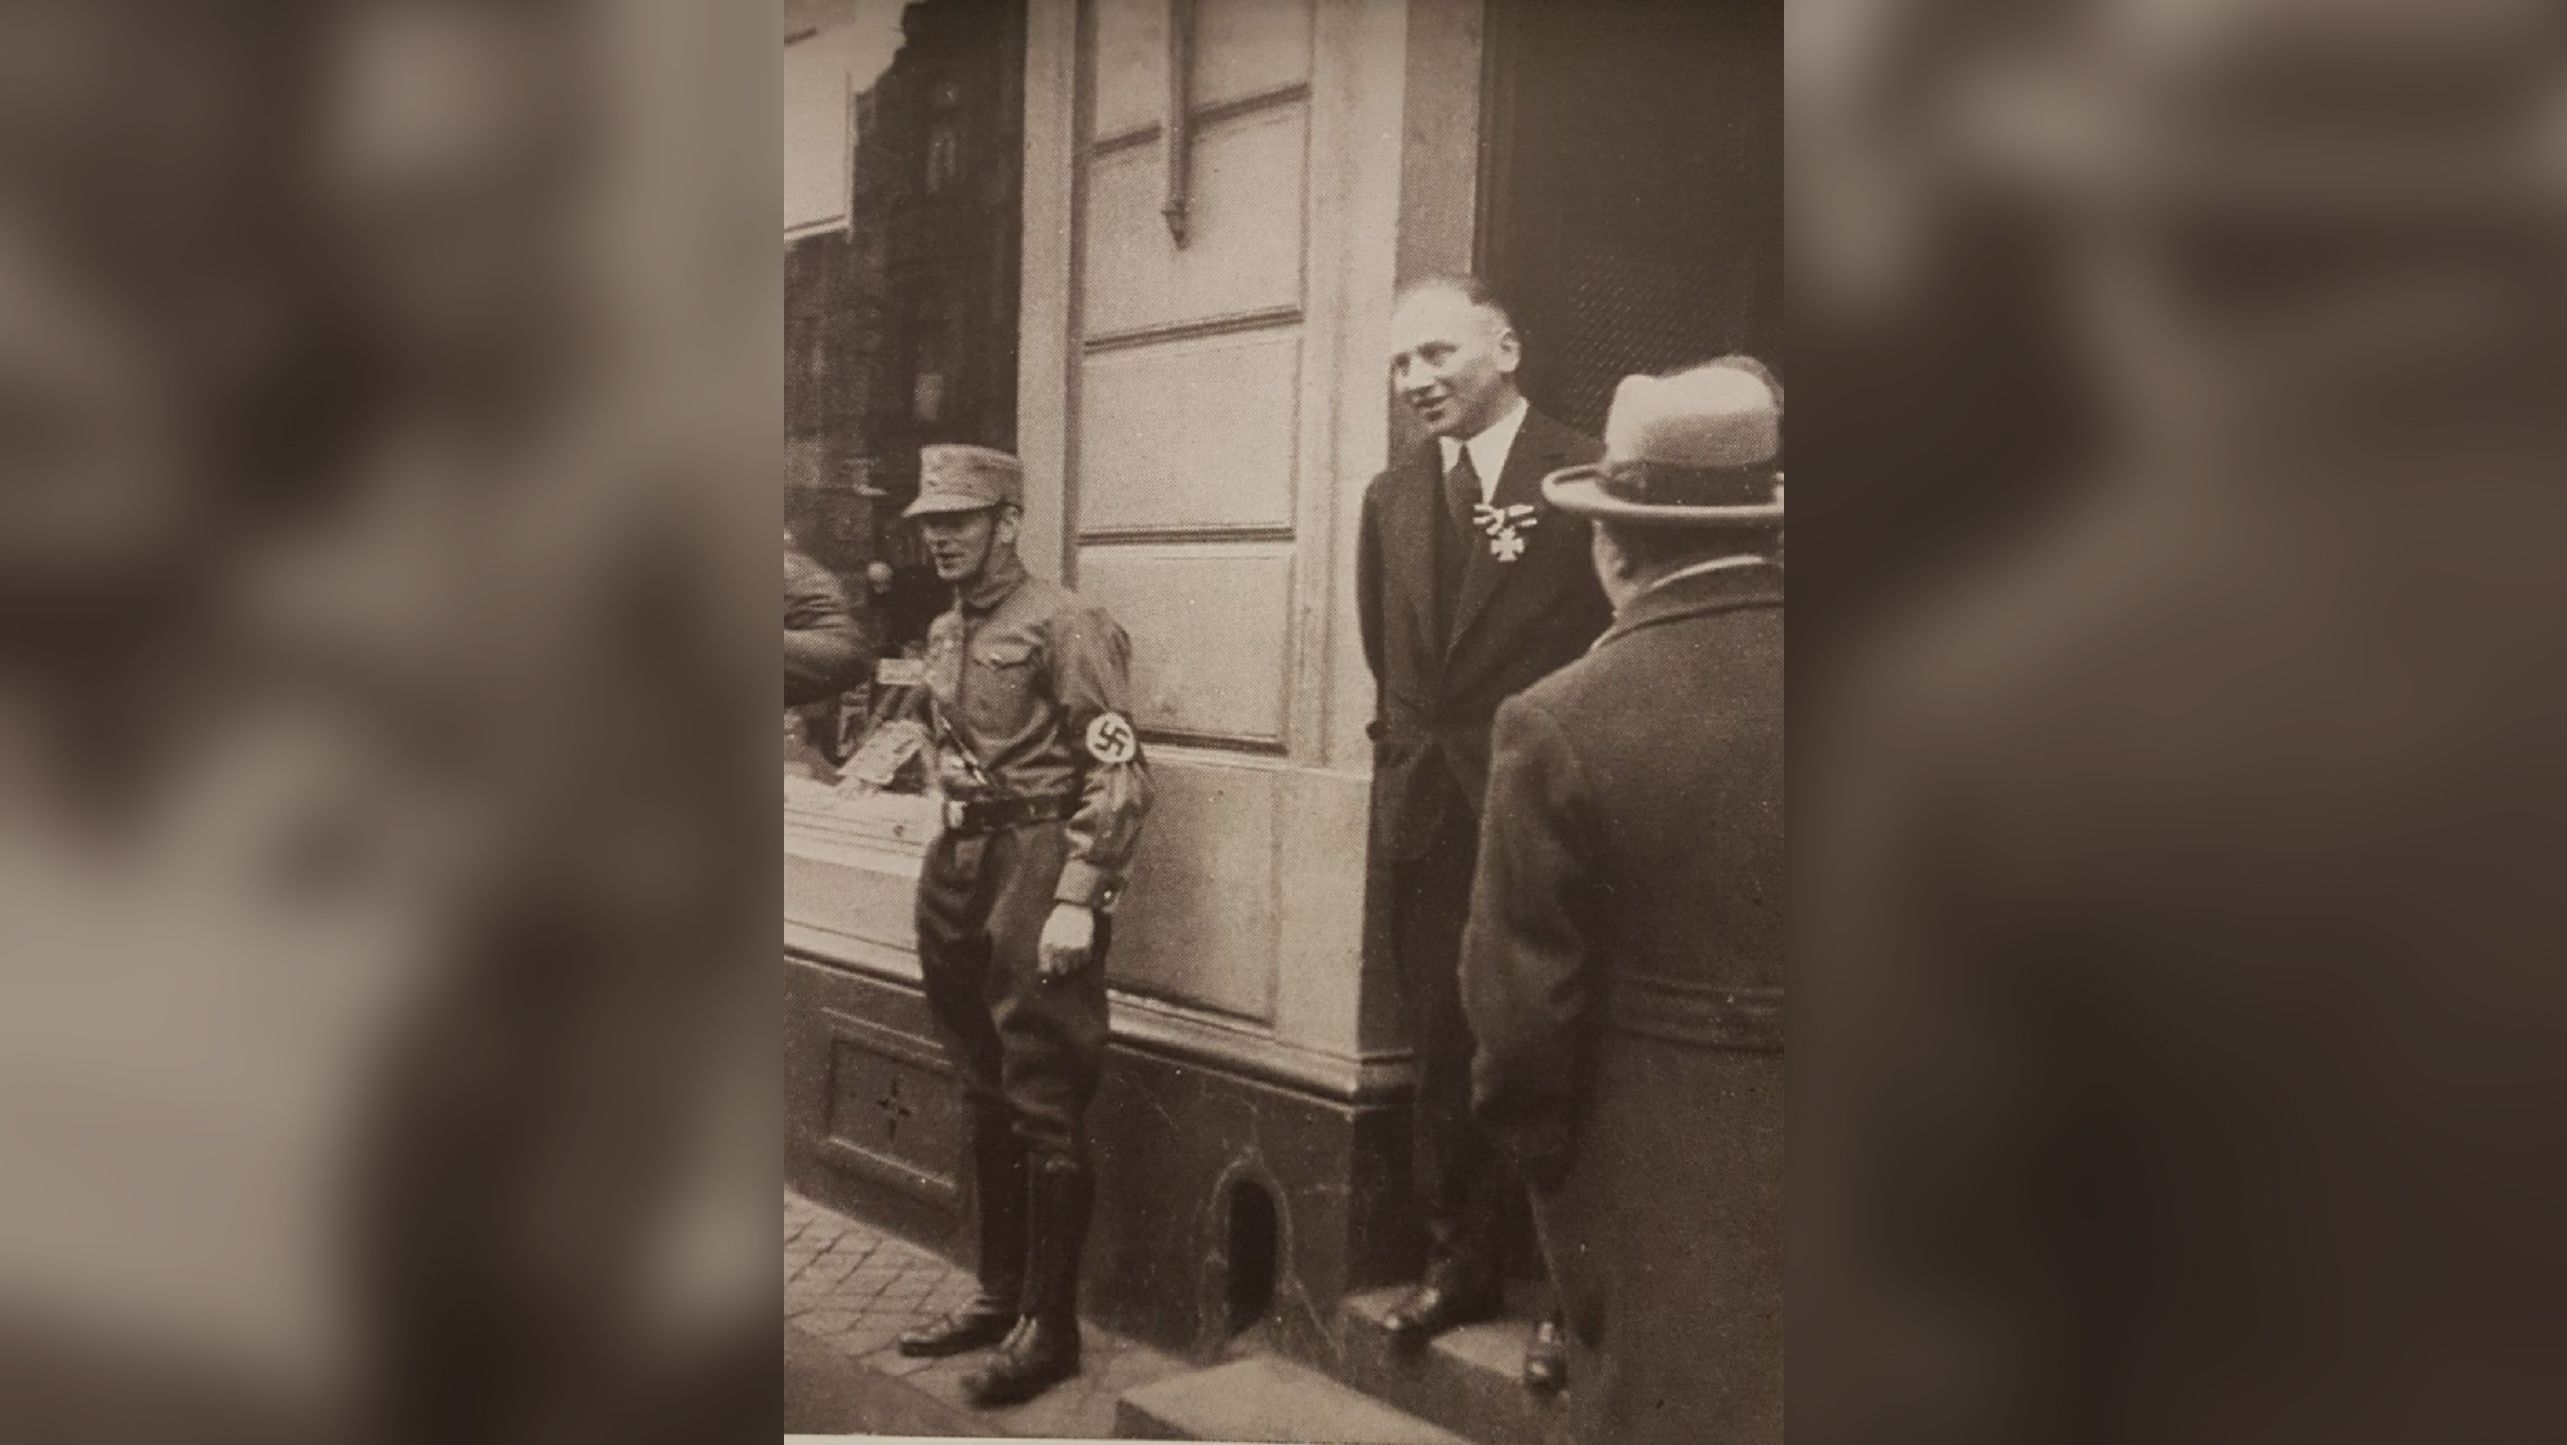 The notorious 1933 image shows Richard Stern, center, wearing his Iron Cross while a young Nazi guards the store.